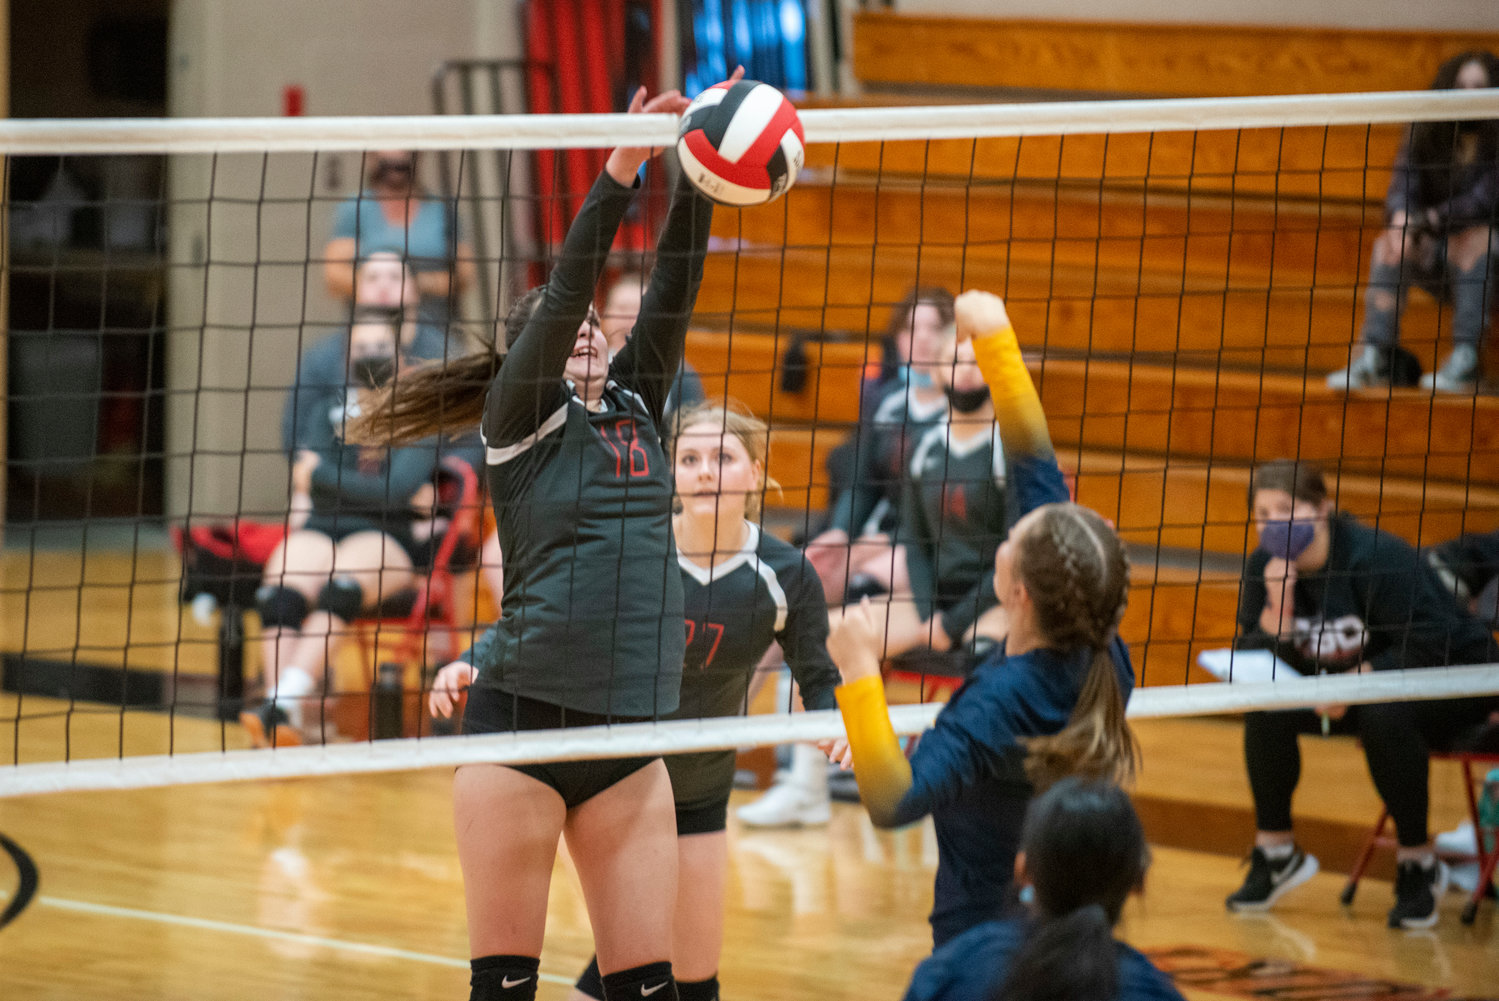 Tenino's Brittany Maynard (18) gets the block on an Aberdeen spike on Monday.